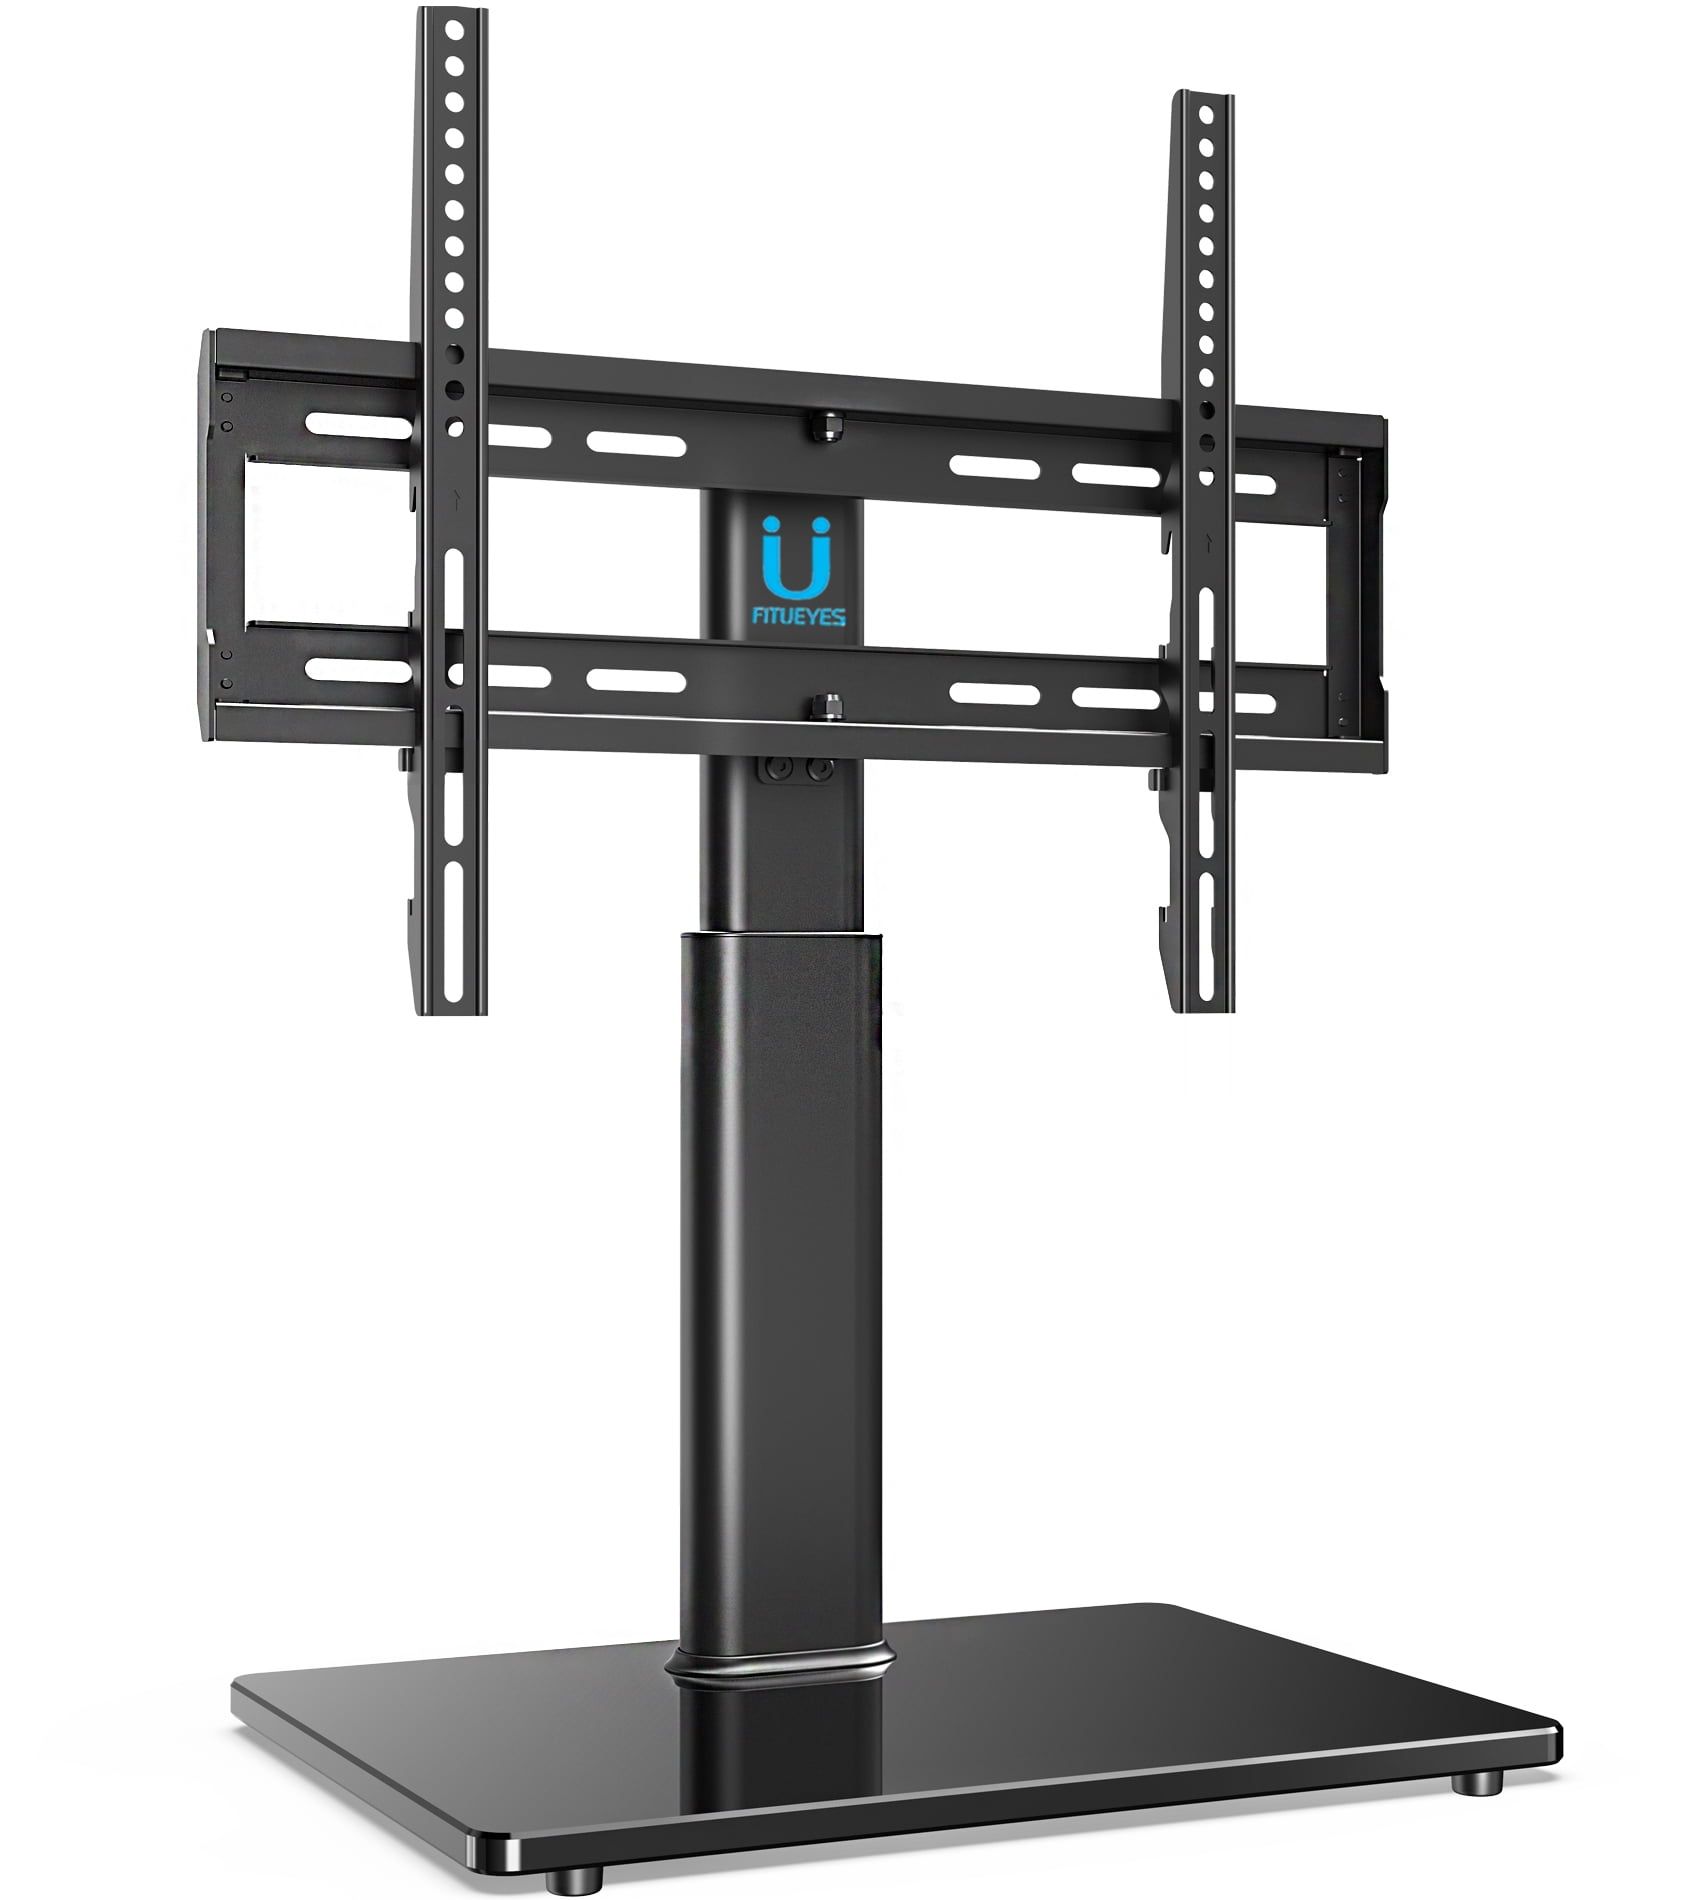 Fitueyes Universal Tv Stand Tabletop Base With Swivel Mount For 32 To With Universal Tabletop Tv Stands (View 7 of 20)